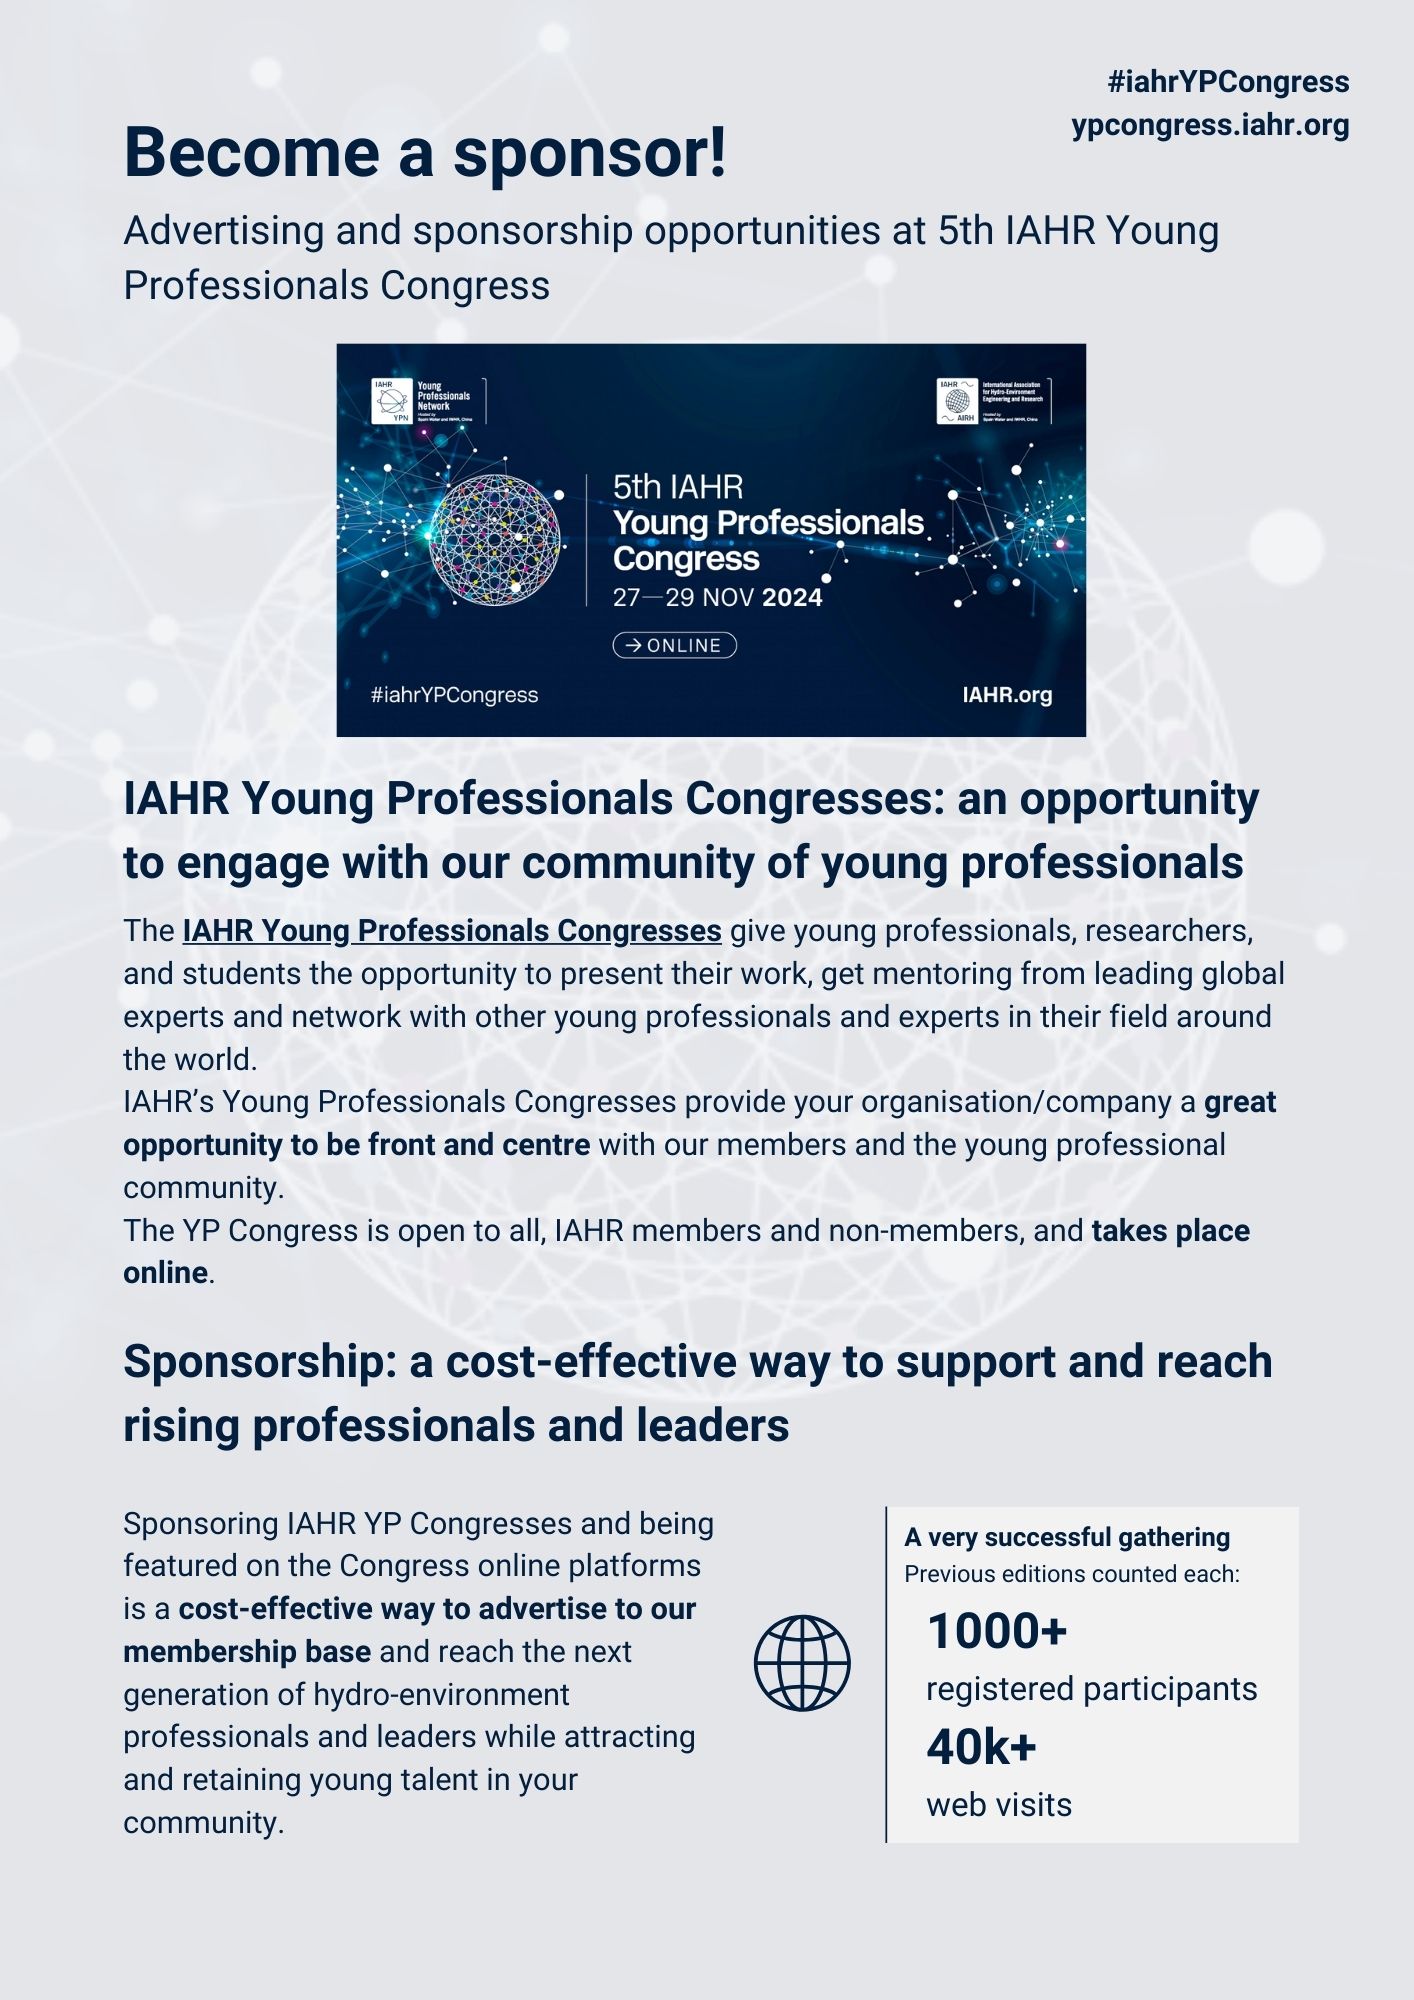 5th IAHR Young Professionals Congress